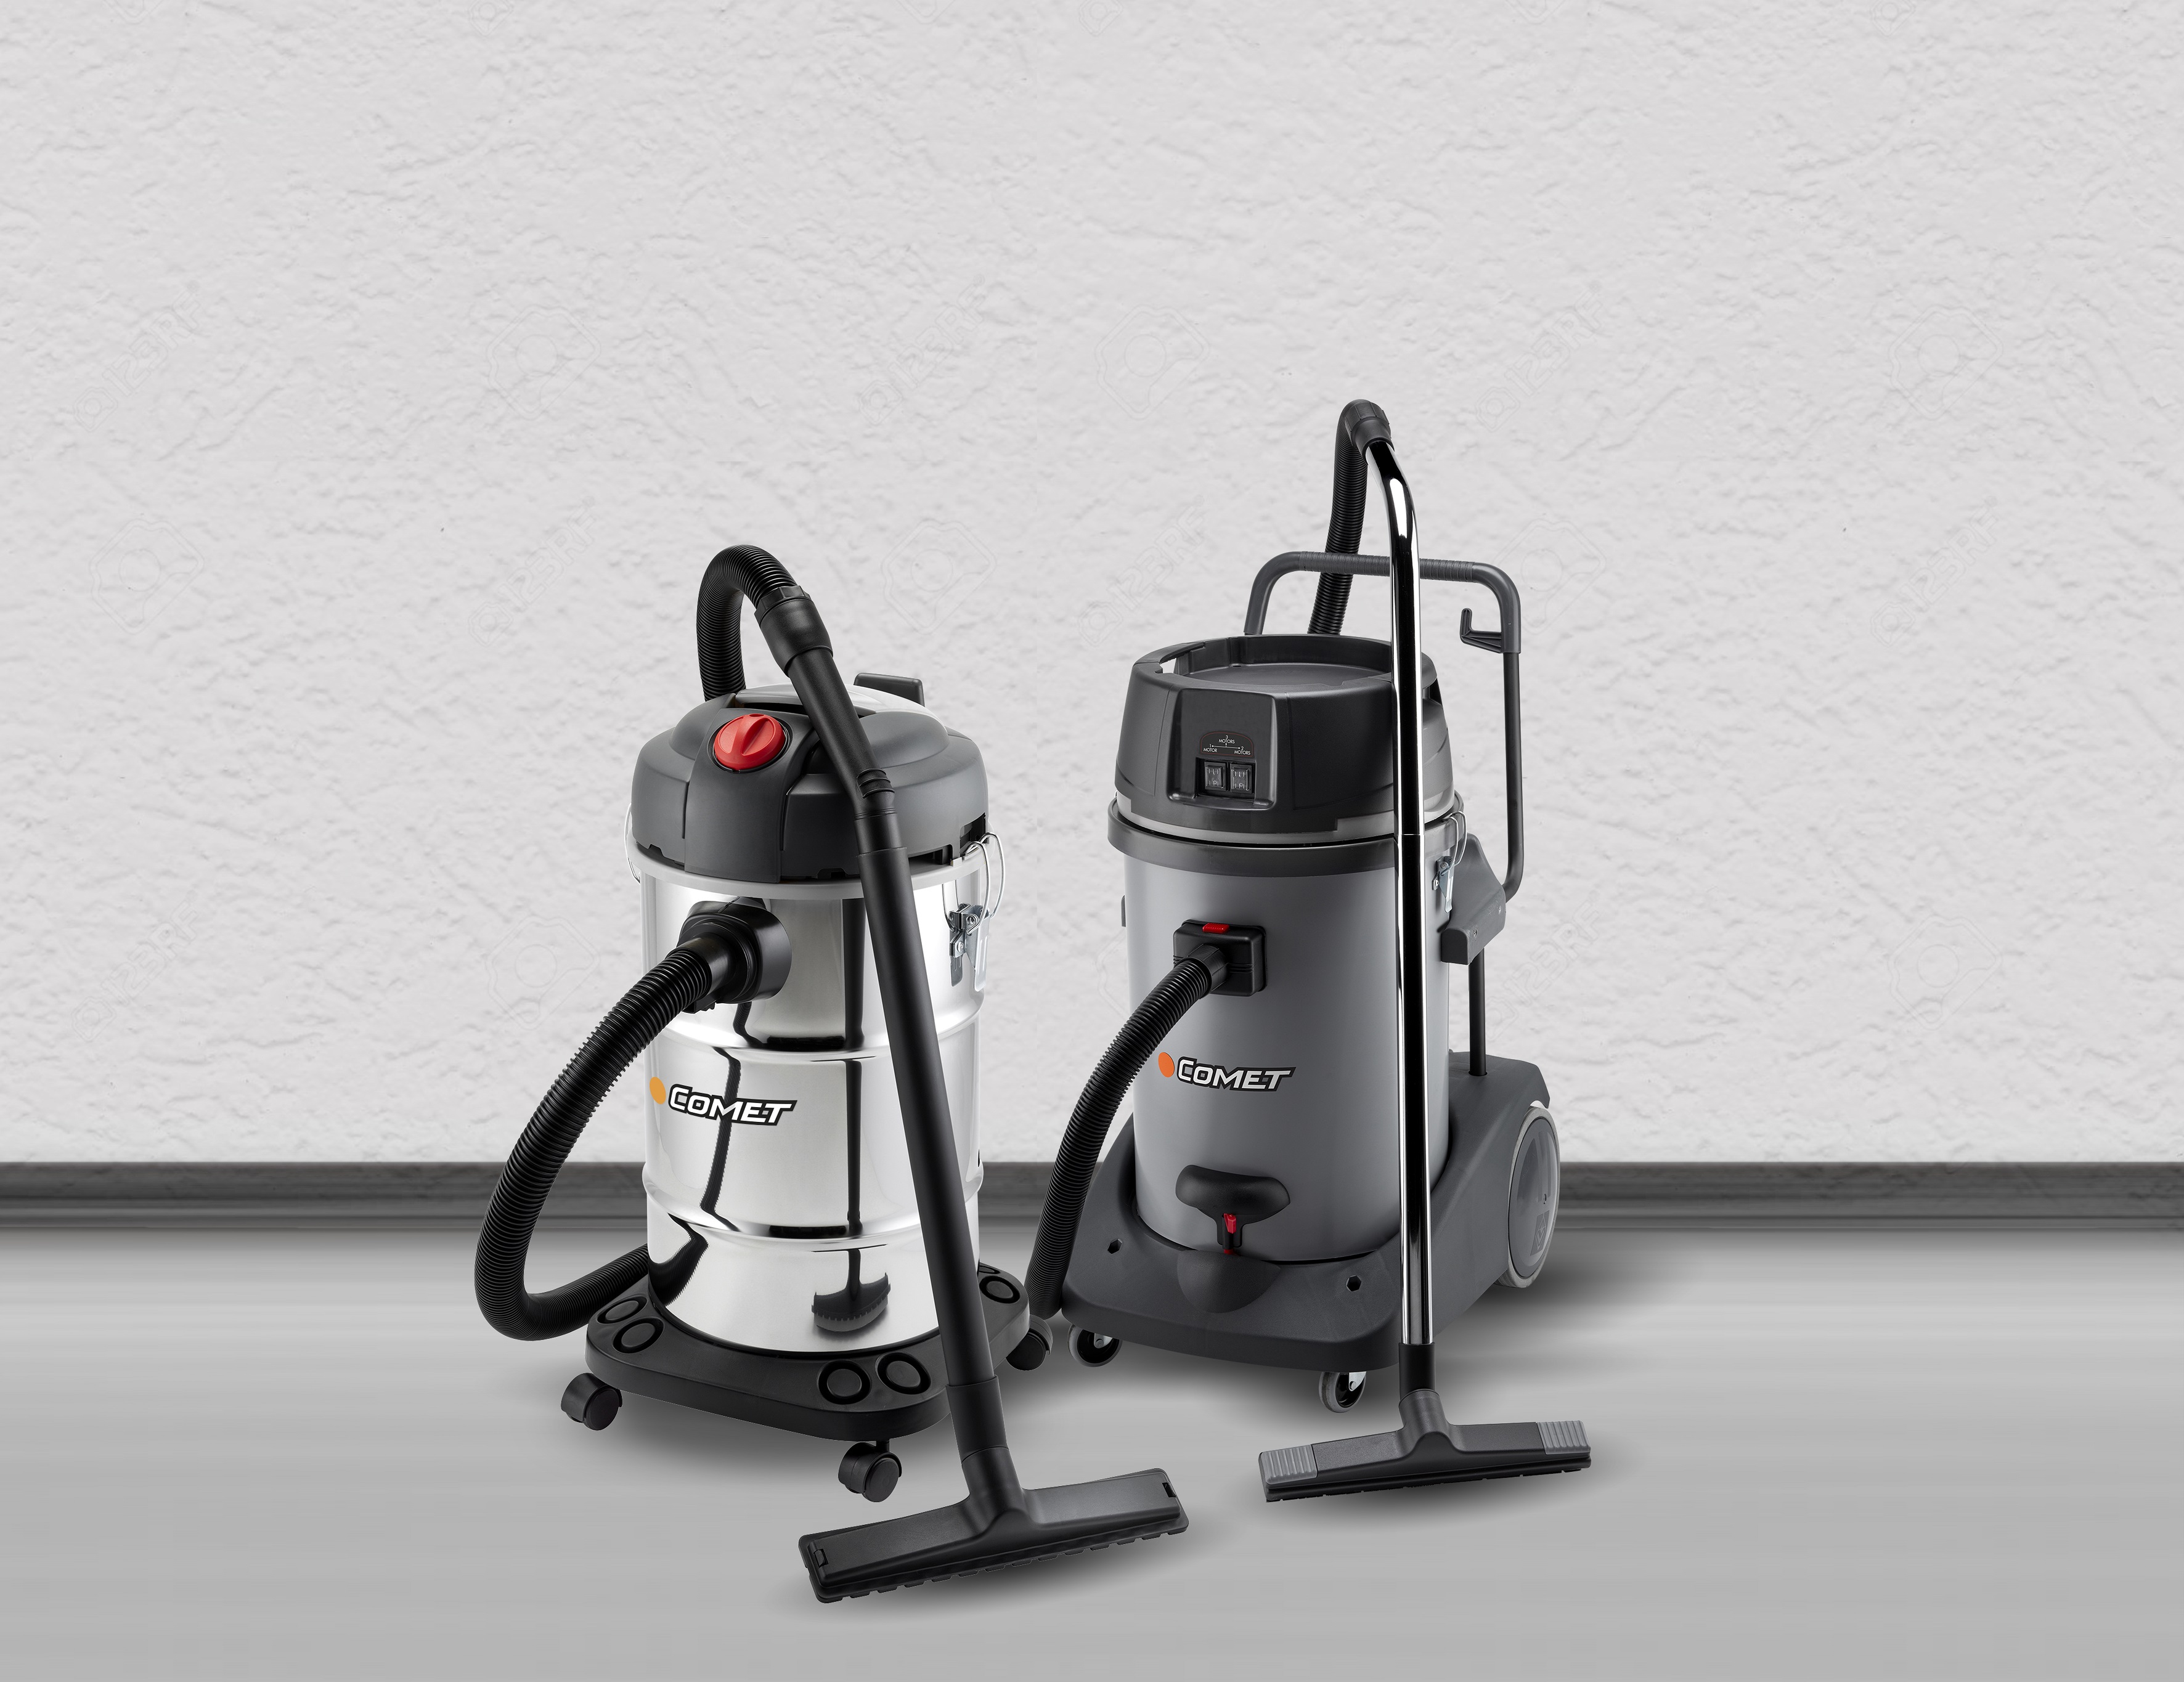 THE ADVANTAGES OF THE WET VACUUM CLEANER FOR YOUR HOME AND PROFESSIONAL CLEANING